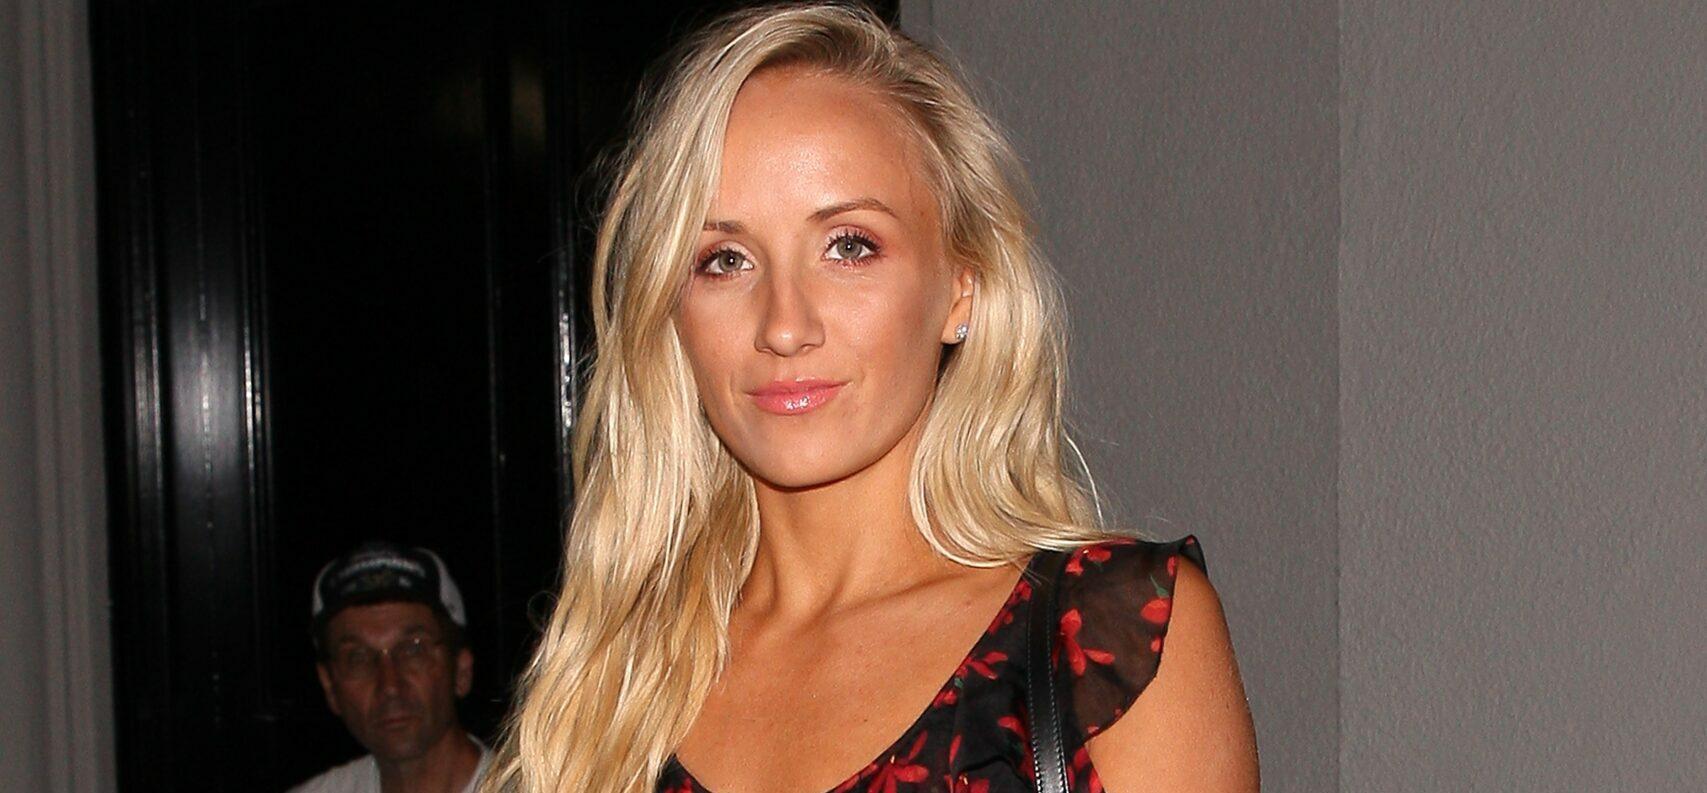 Gymnast Nastia Liukin In Crop Top Teases Her ‘Pumpkin Spice’ Outfit